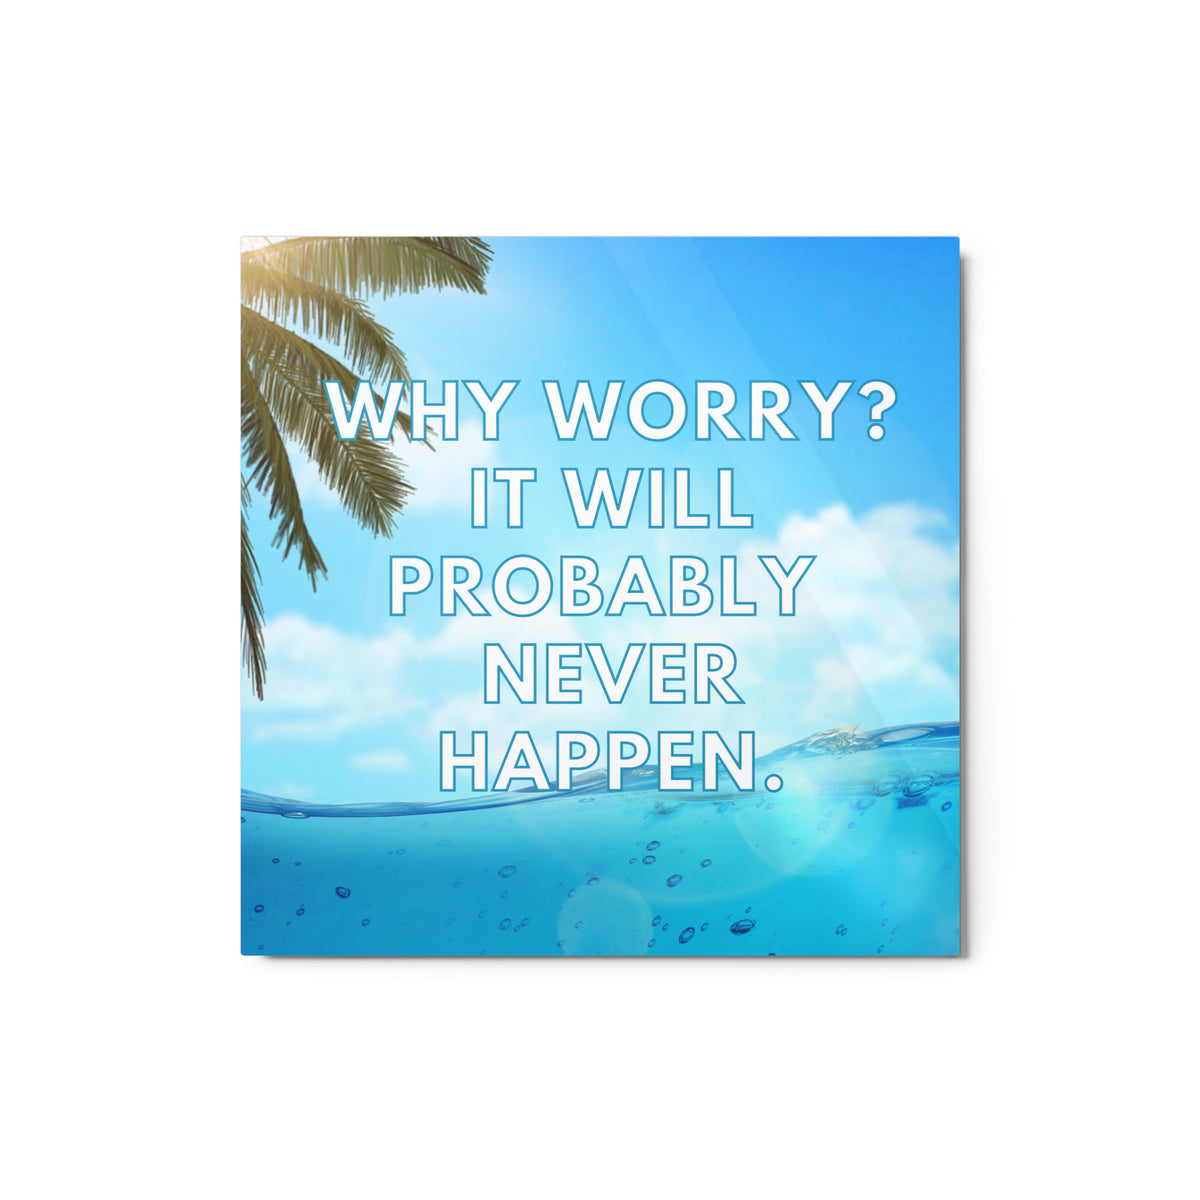 Why Worry? It Will Probably Never Happen | Inspirational Wall Art | Glossy Metal Print  Success Acceleration Tools